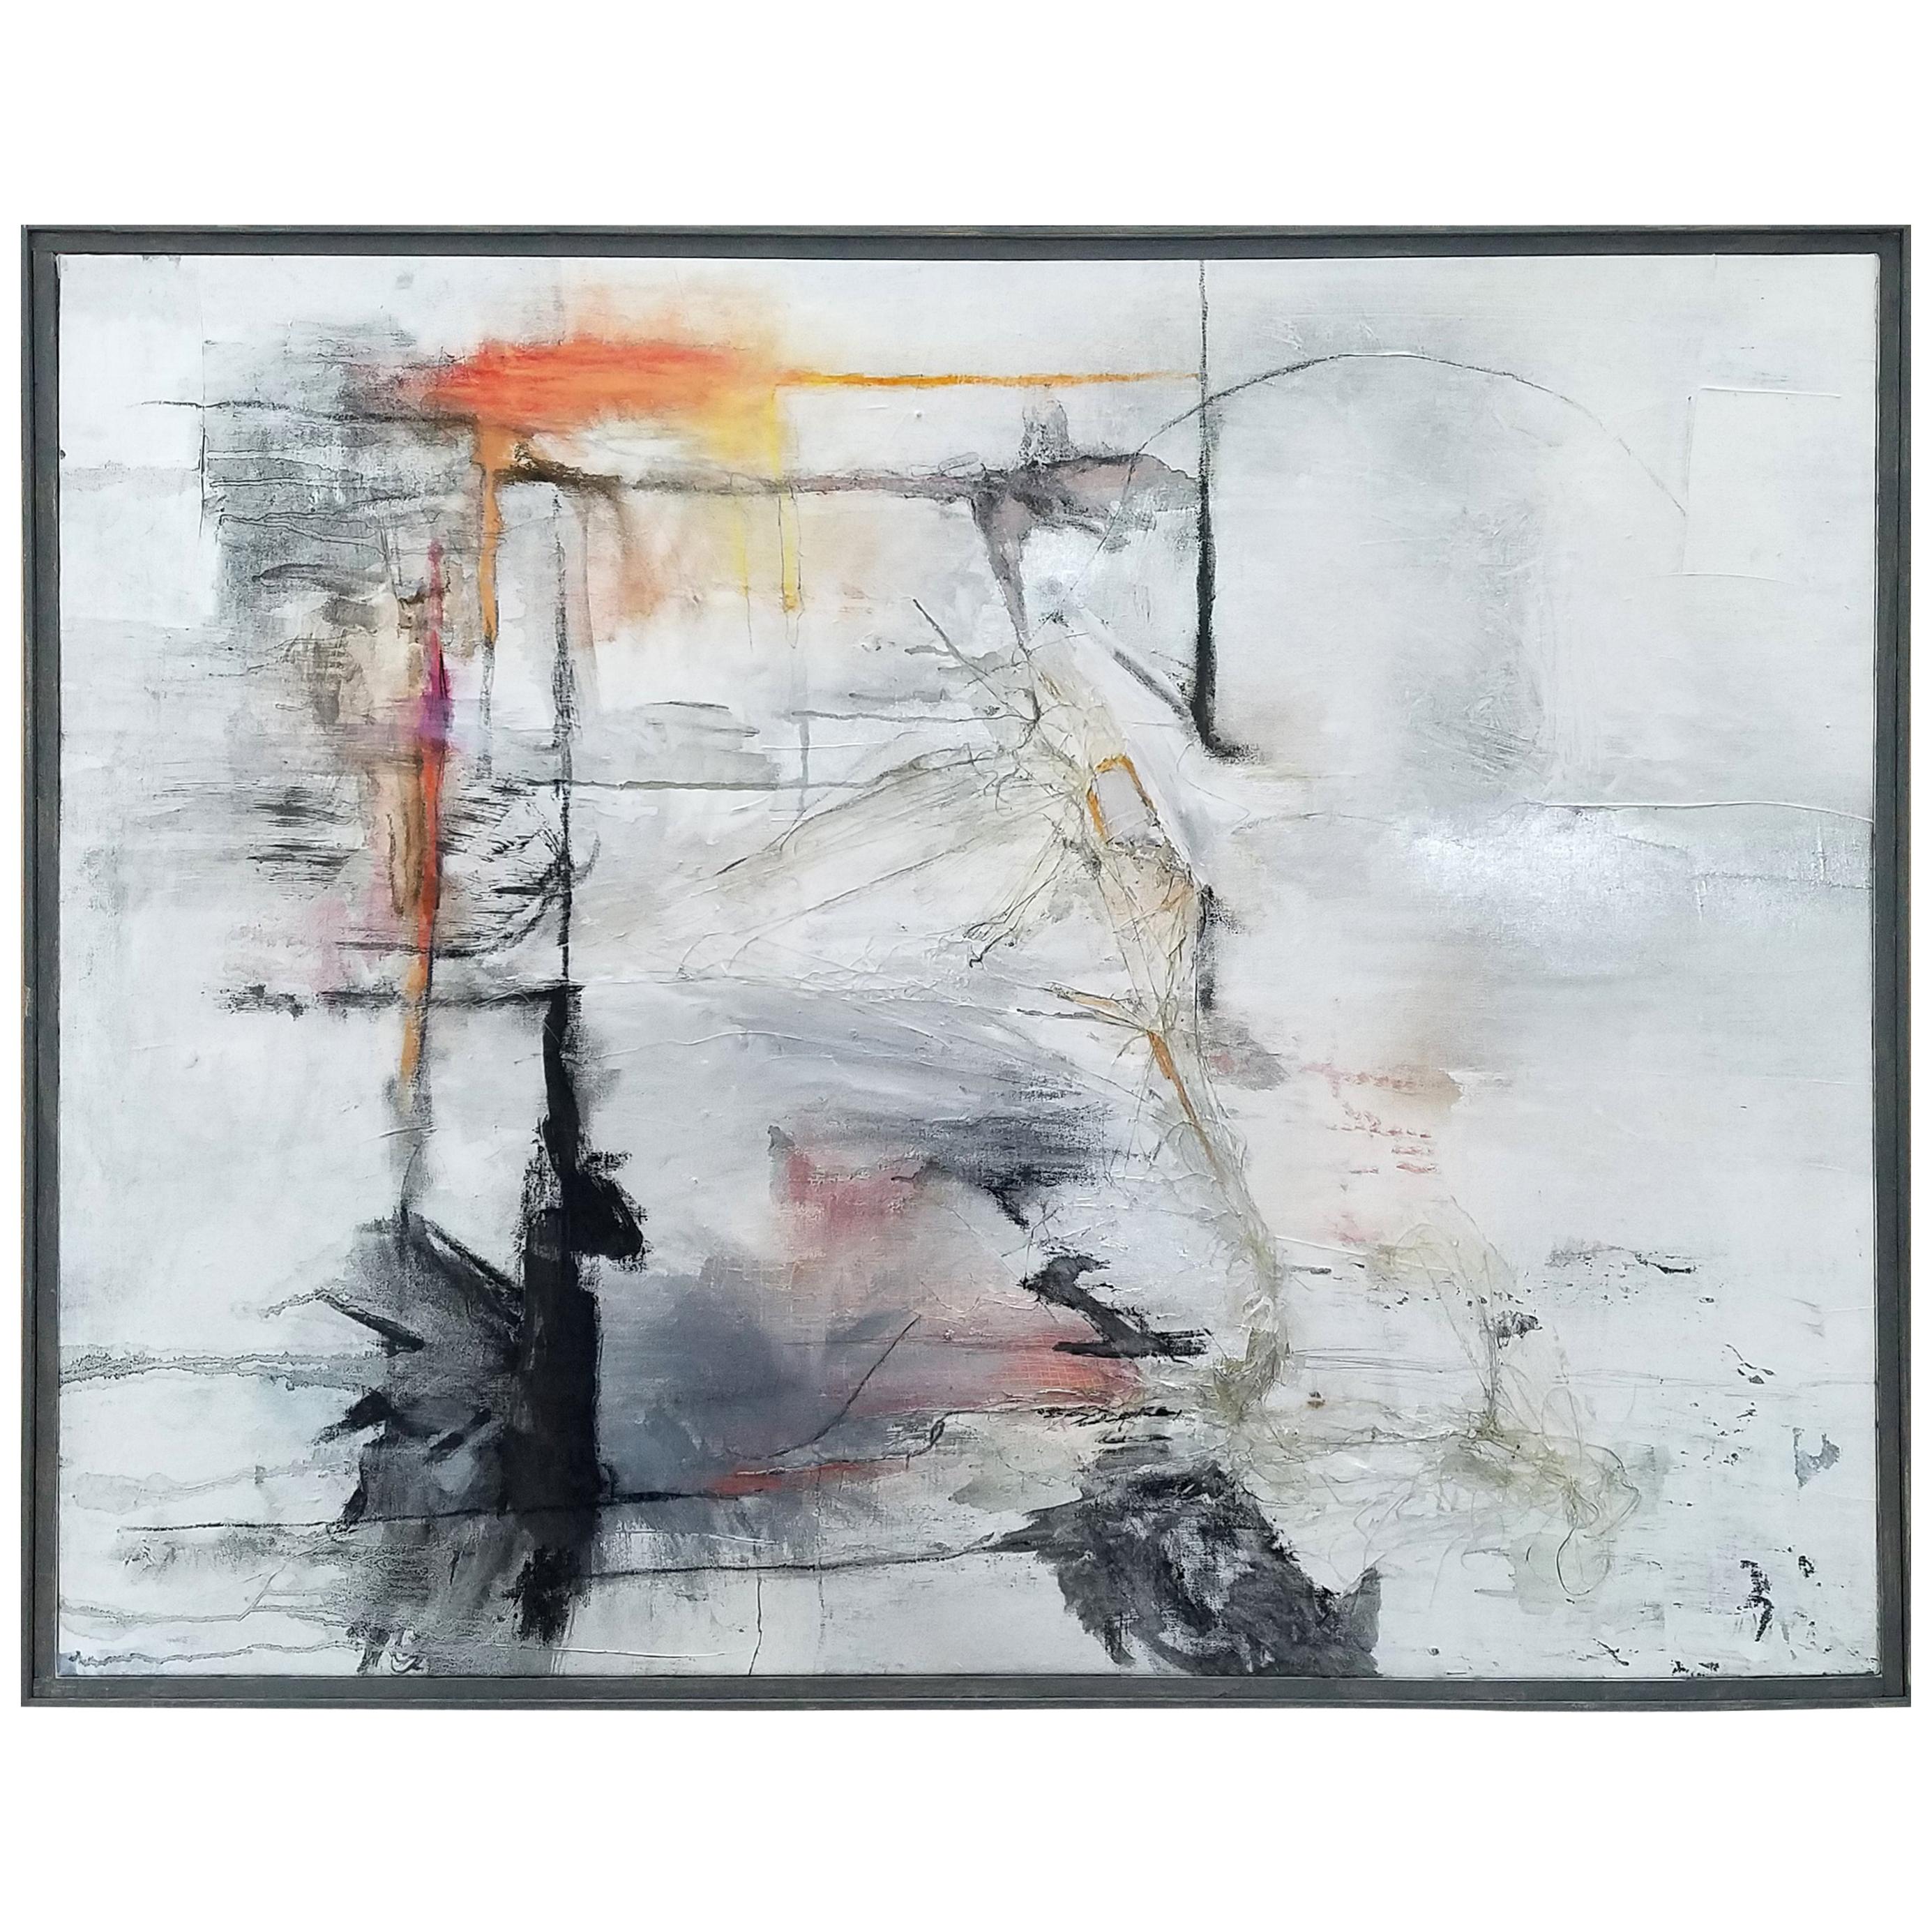 "Reflections," Black, White and Gray Abstract Painting by Kathi Robinson Frank